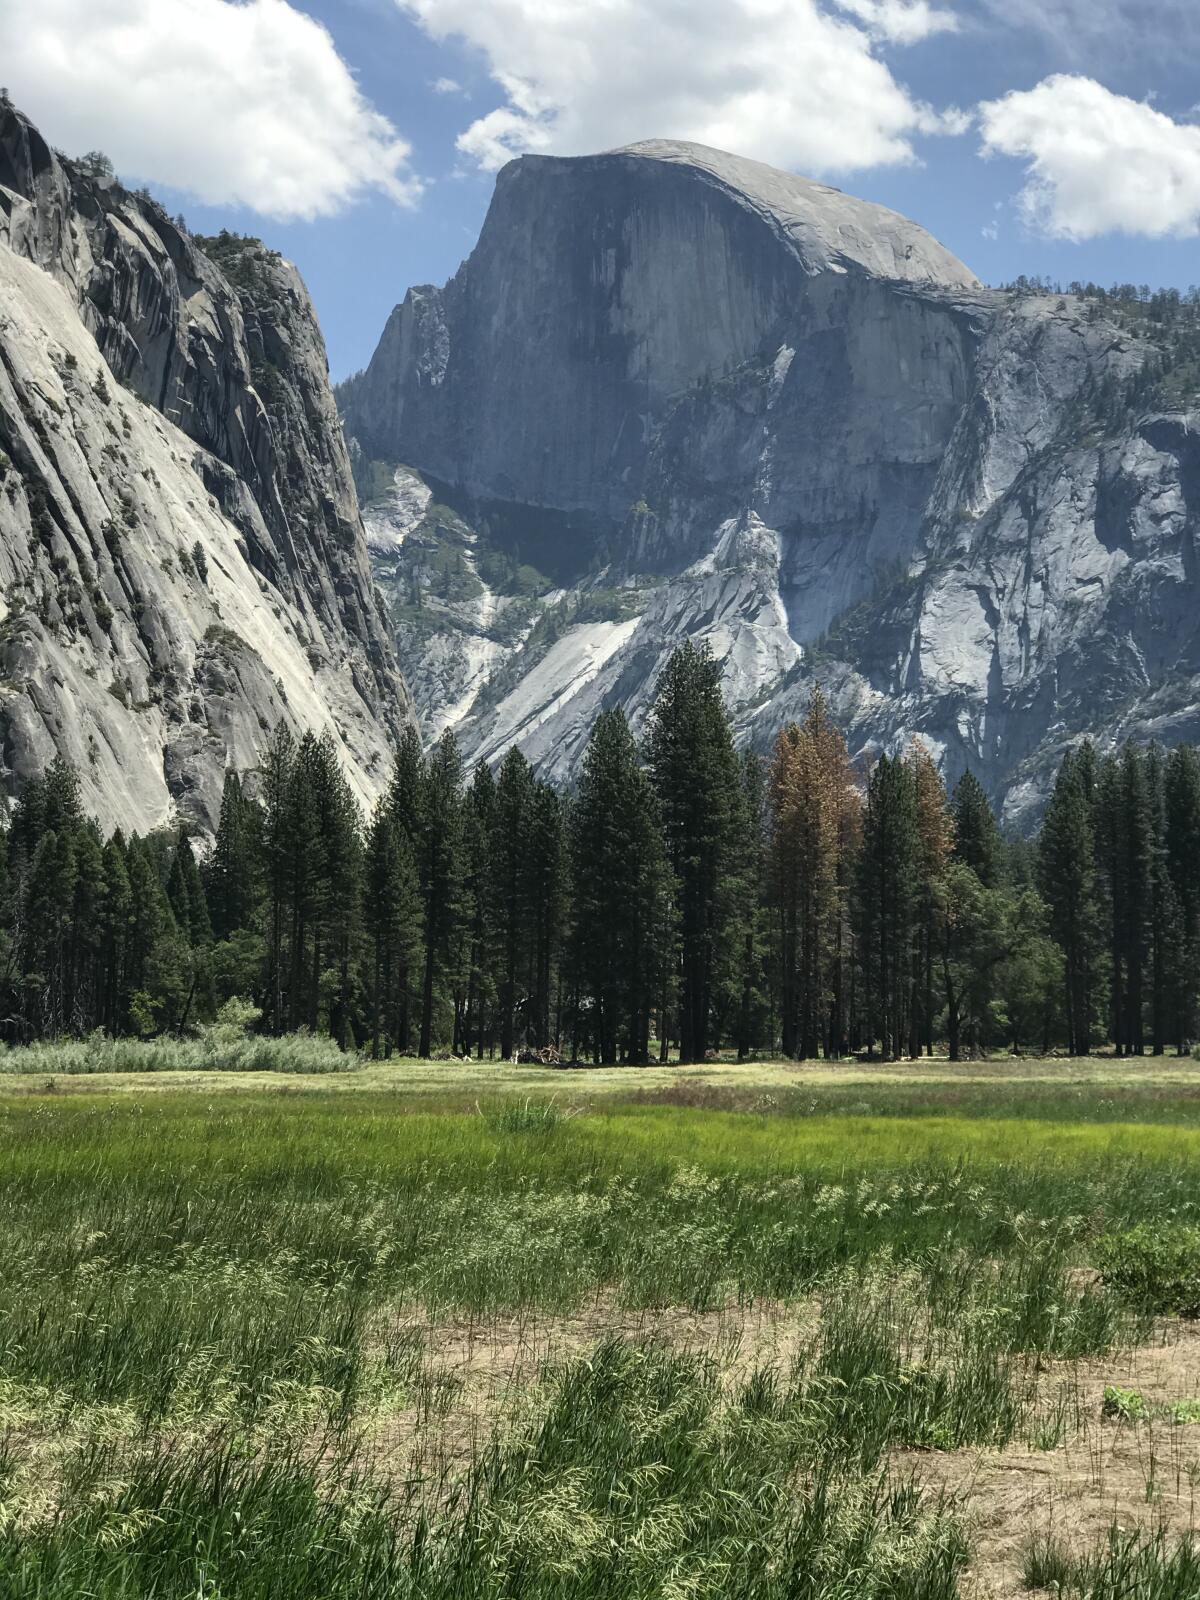 Half Dome in Yosemite National Park, photographed in June 2020.